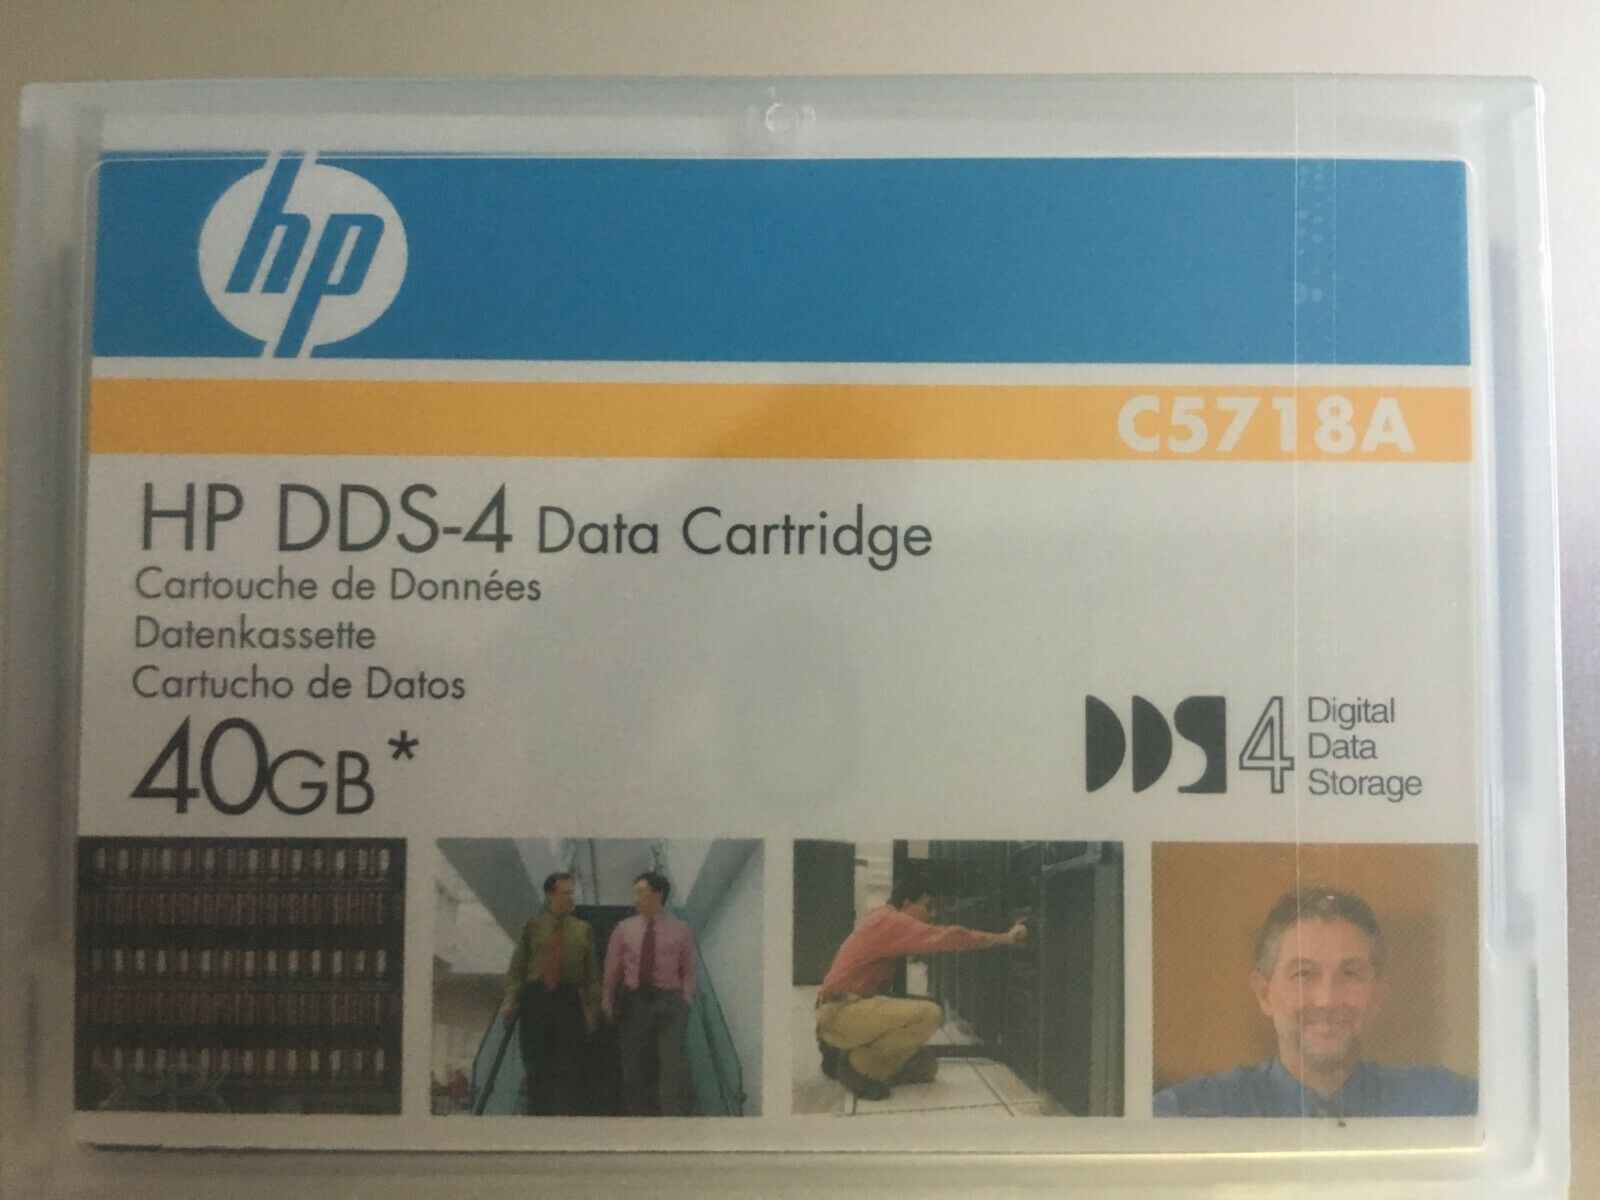 One New Factory Sealed Hp C5718a 4mm Dds-4 Data Tape Cartridge 20gb/40gb Dat40